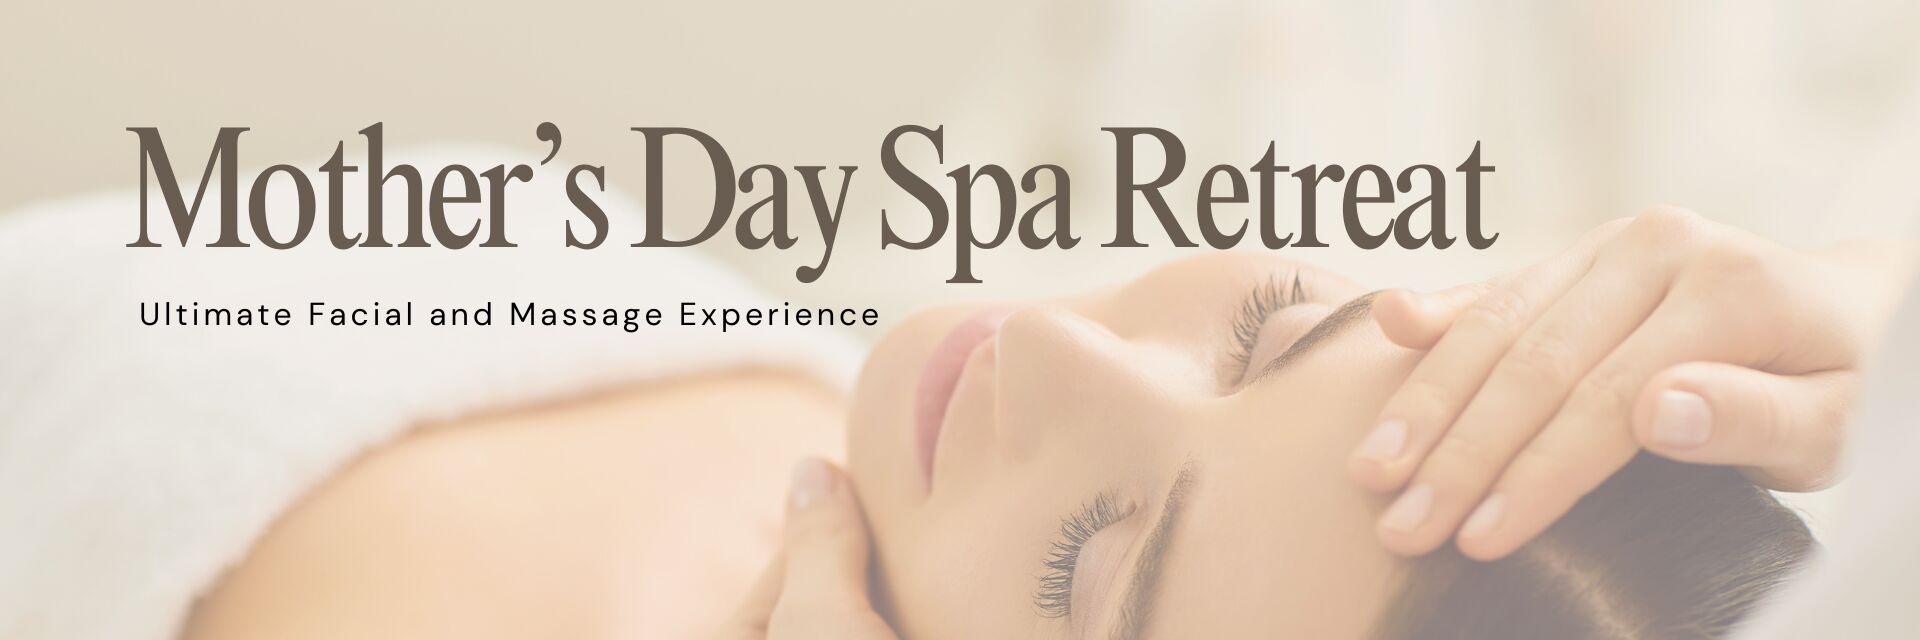 Mother's Day Spa Retreat